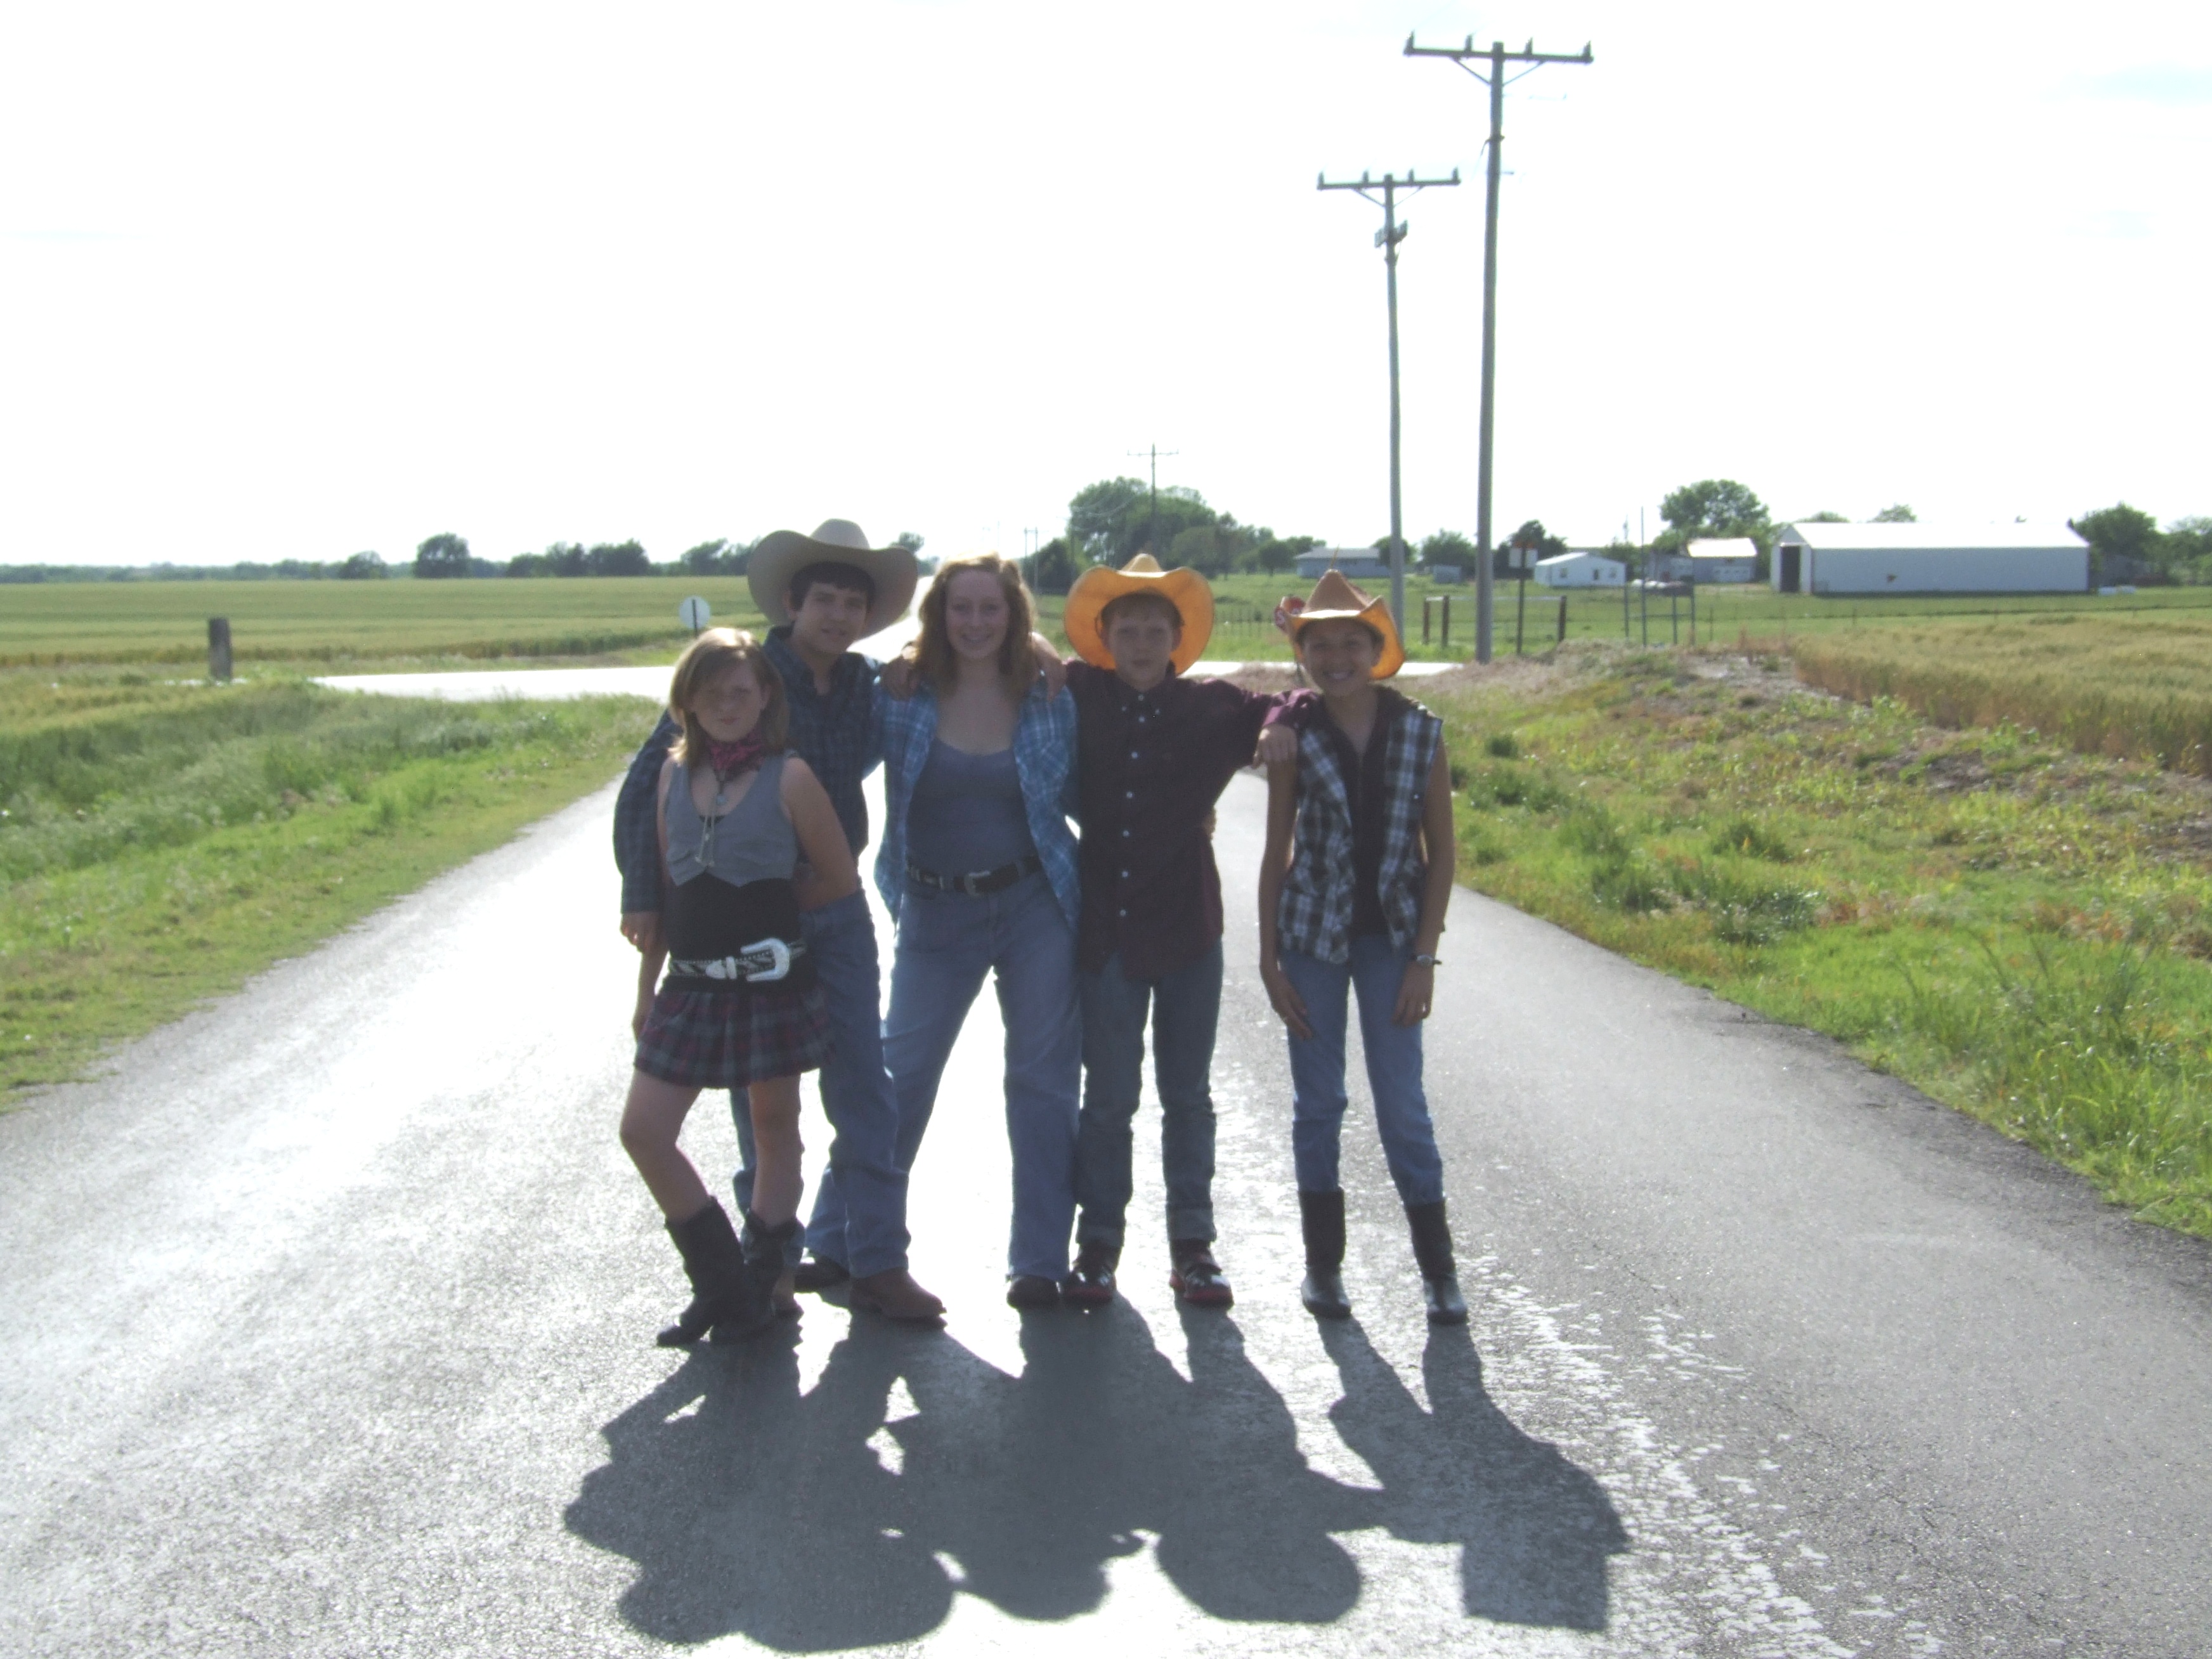 One of the cover pics for Music Video - 6 Friends & A Camera. (L to R) Jonnie Lyn-Marie, Tryston Skye, Kara Williams, Isaac Cervantez, and Abi Walkabout.